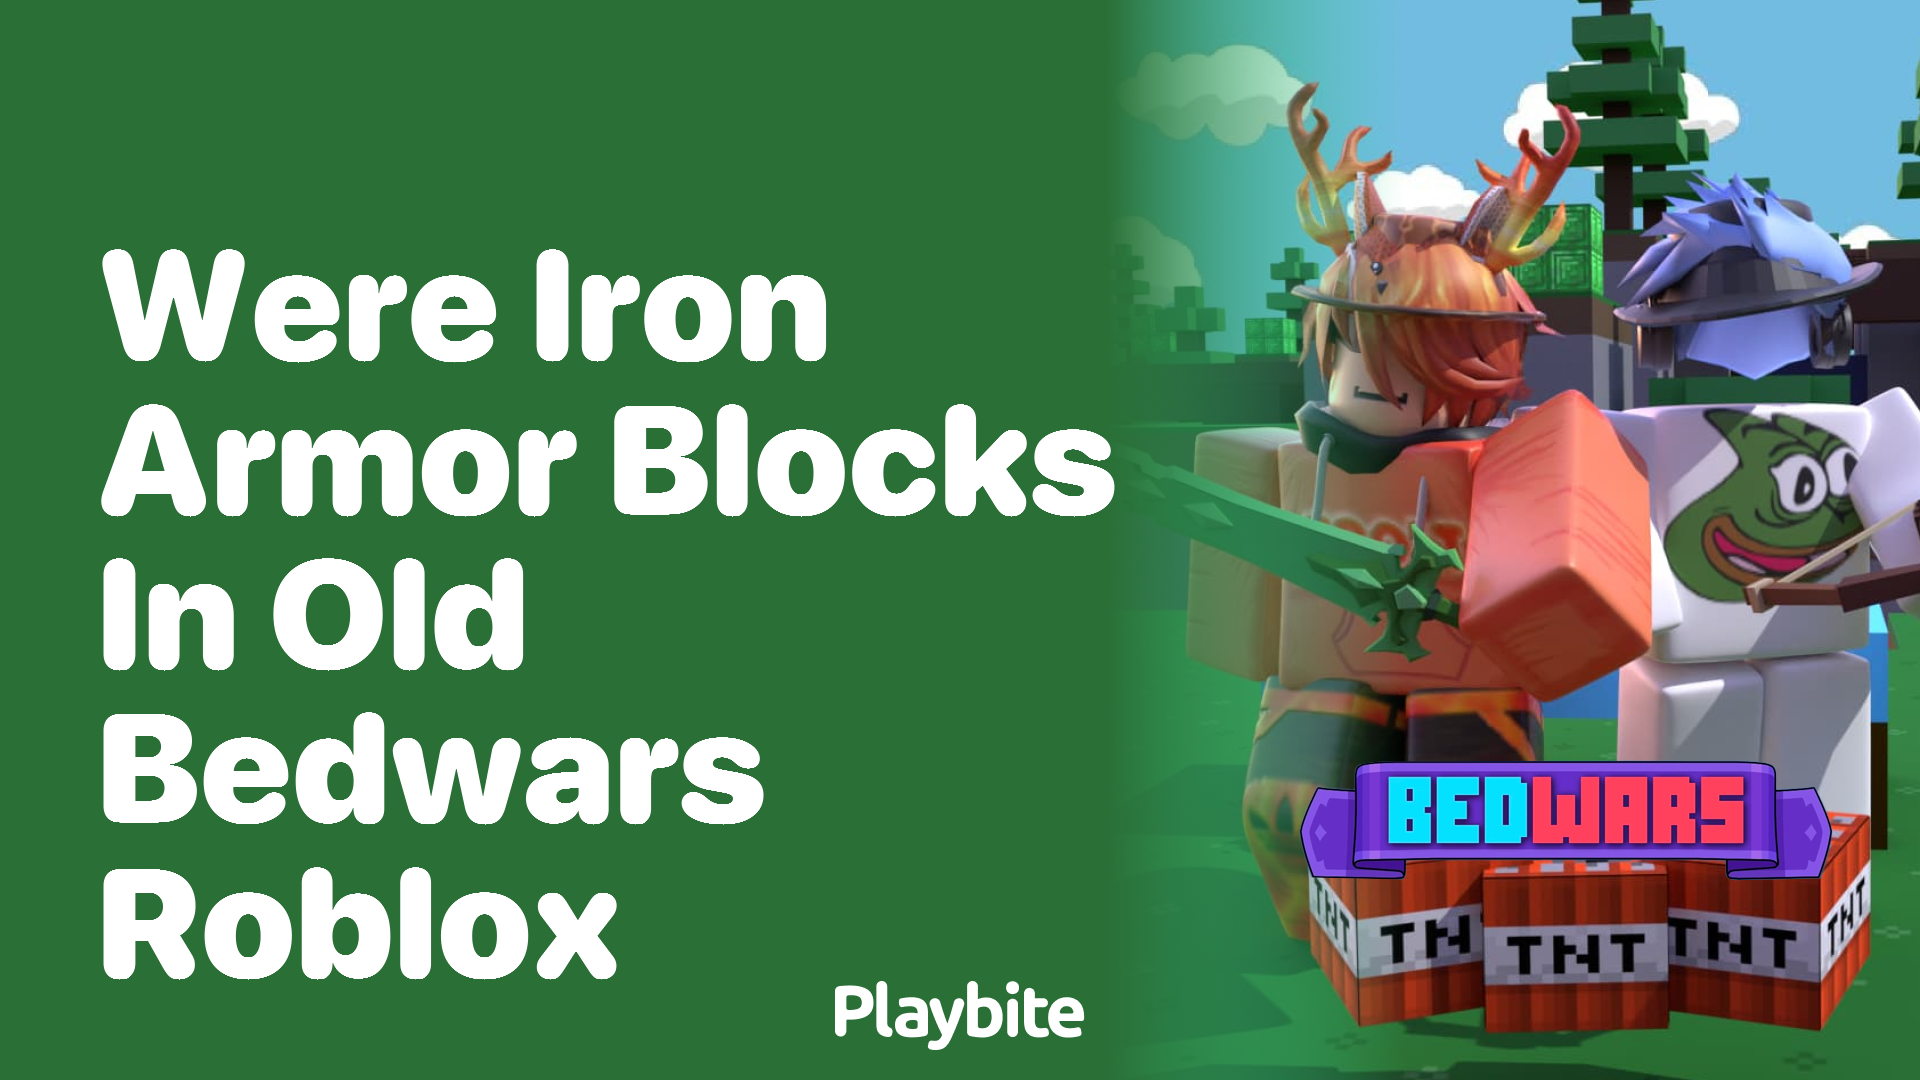 Were Iron Armor Blocks in Old Bedwars Roblox?